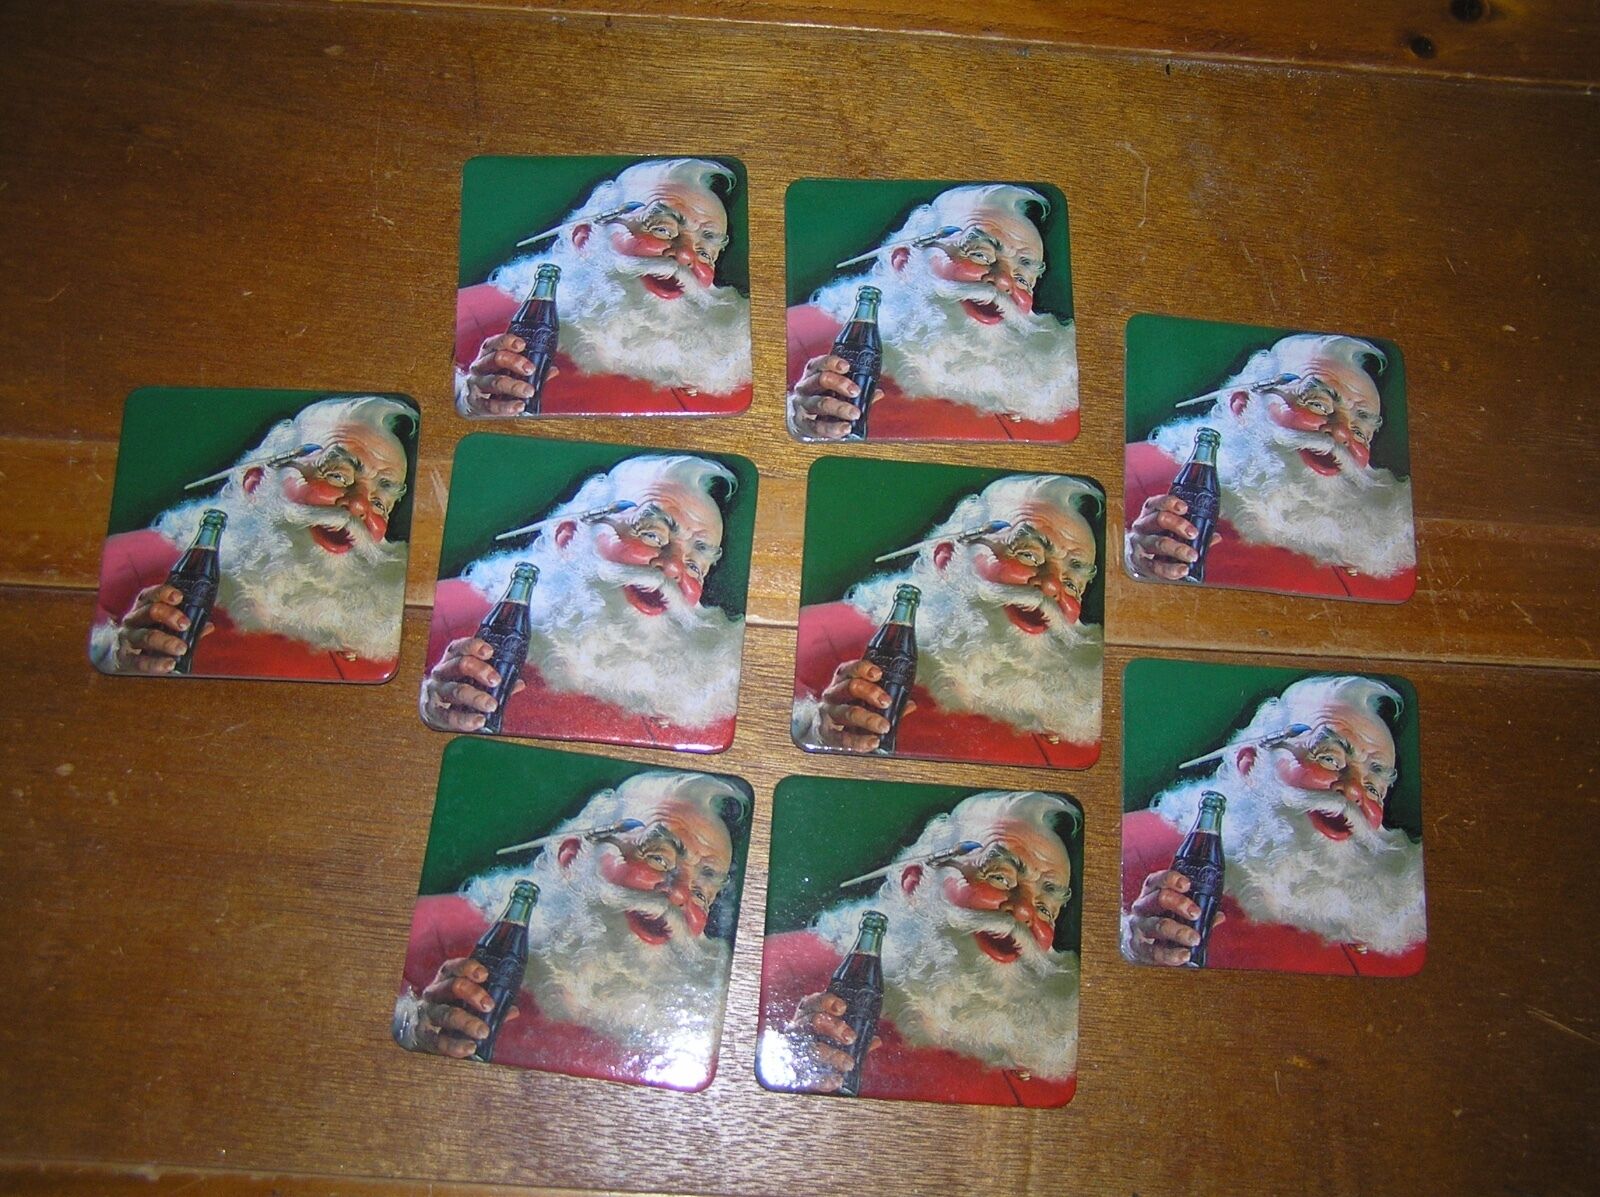 Lot of 8 Vintage Reproduction Santa Claus Drinking Coca-Cola Square Cork Backed 